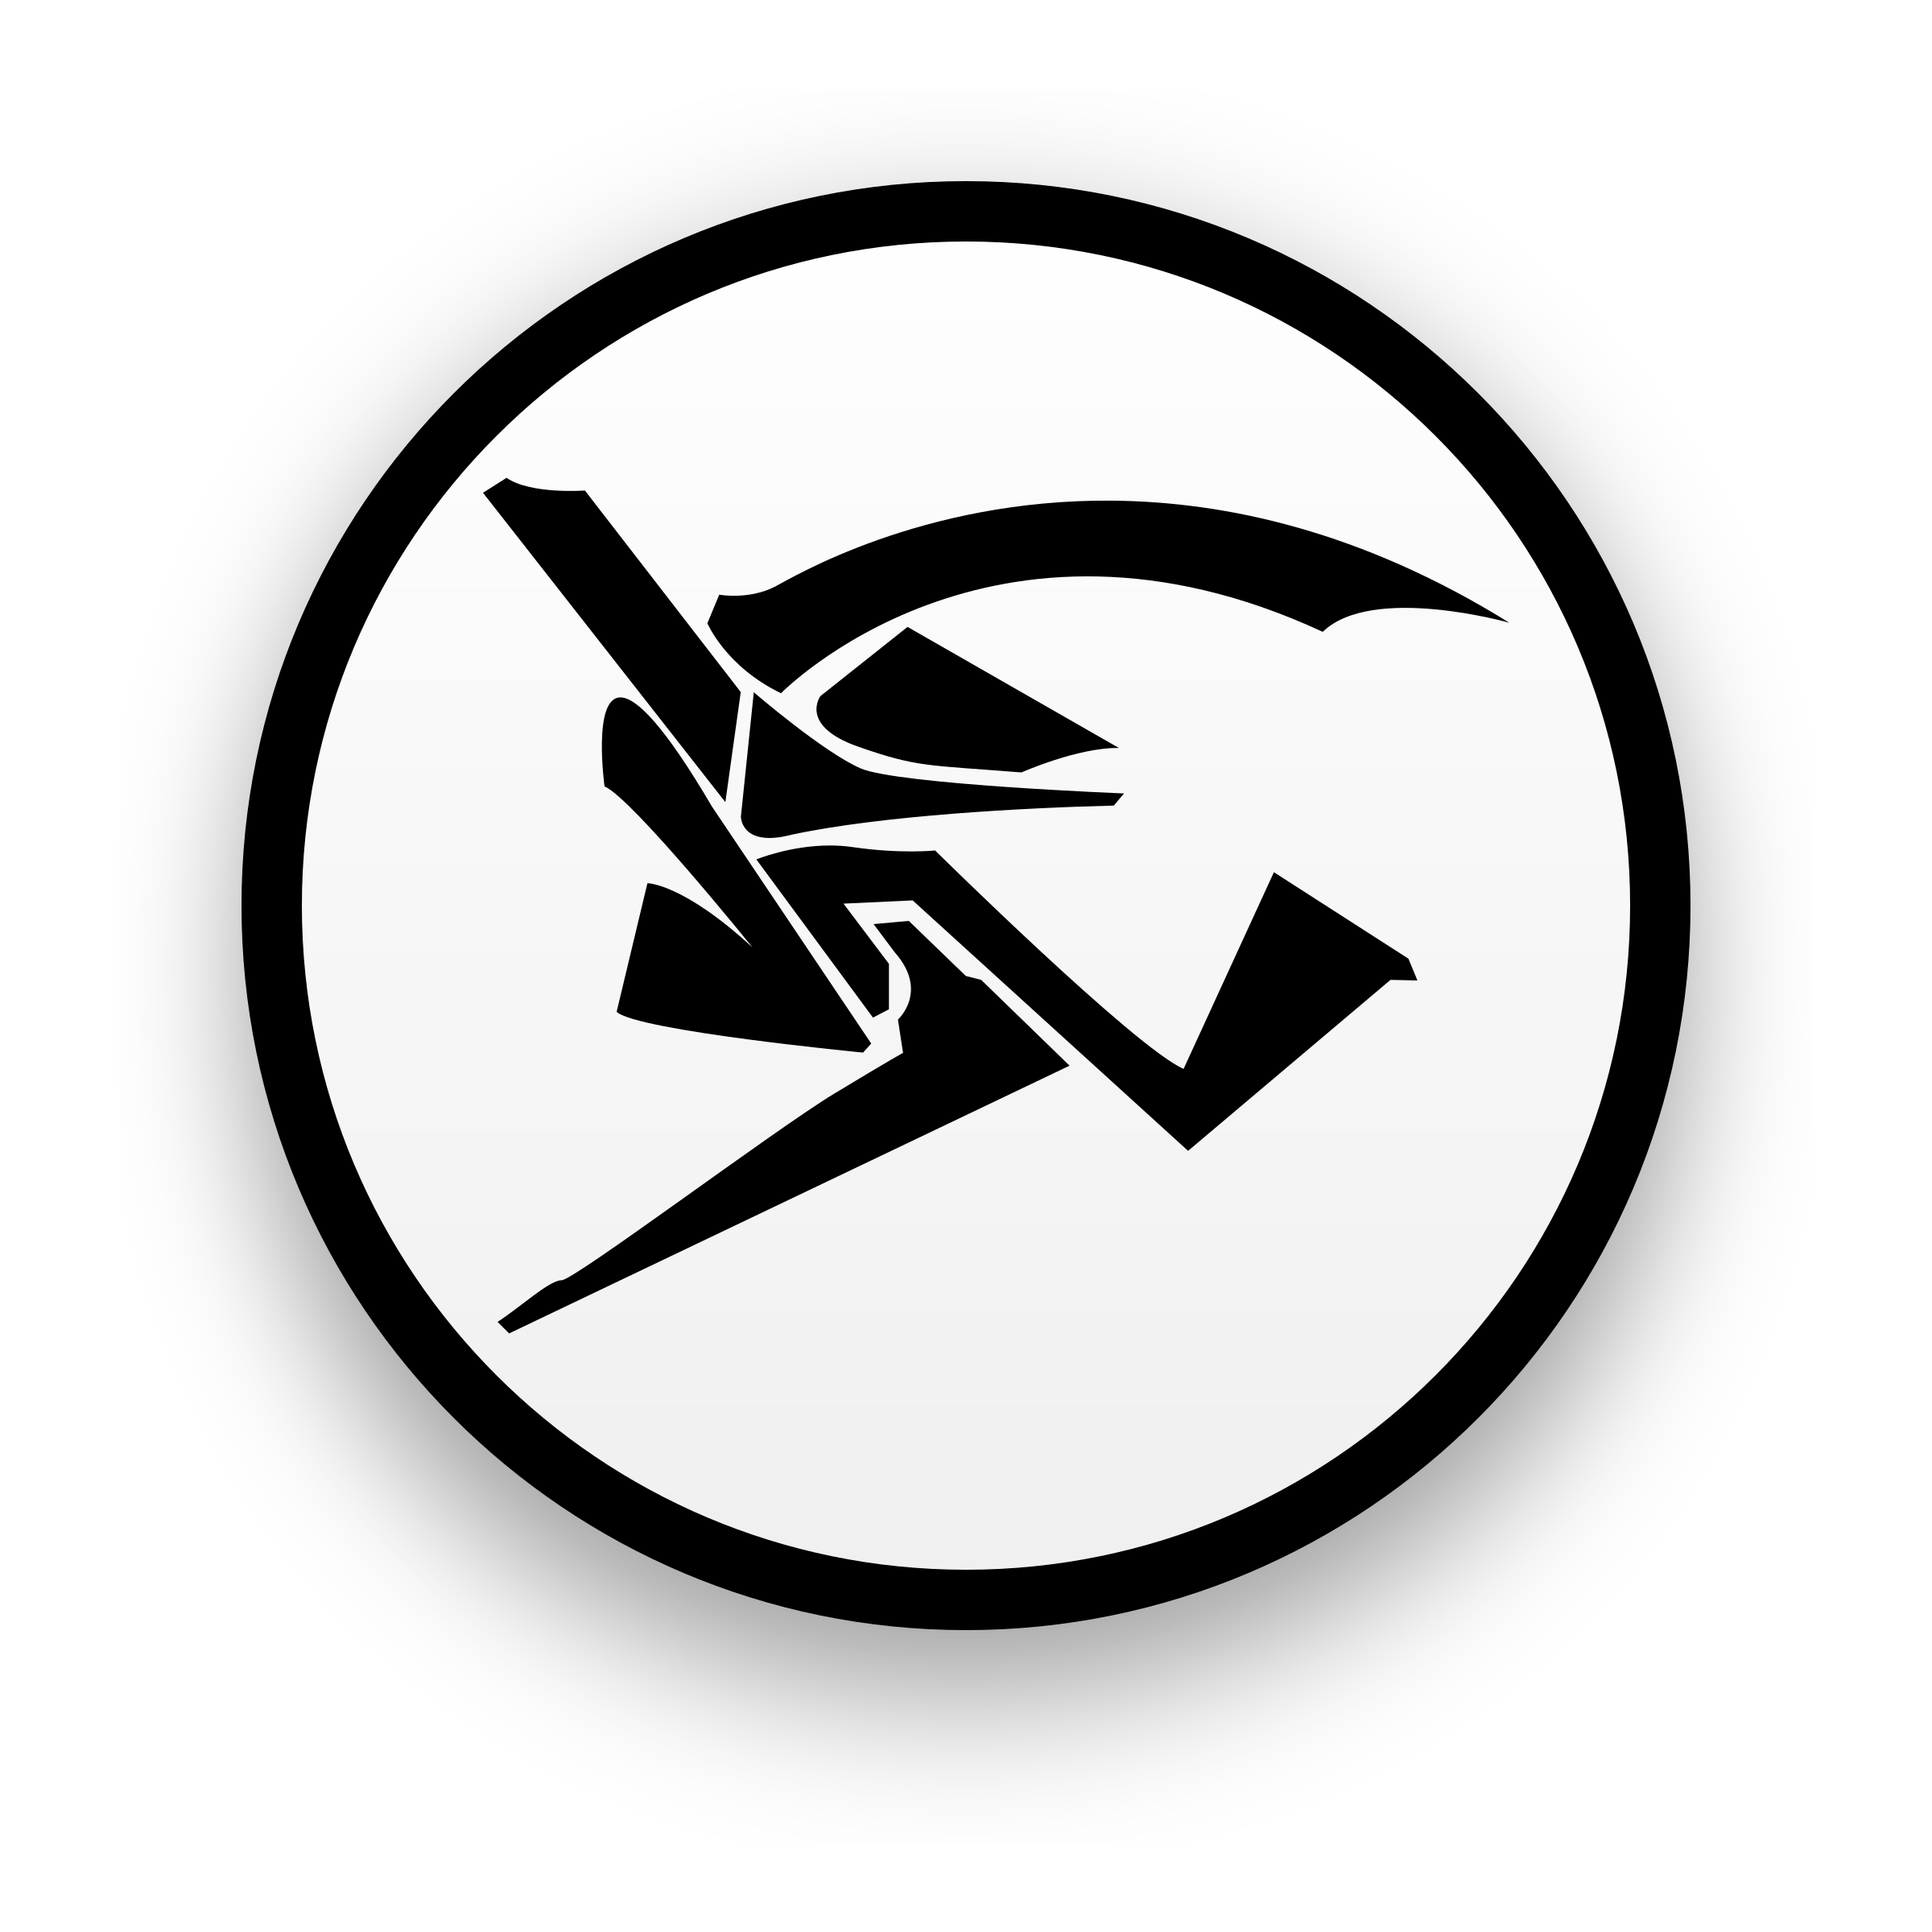 Running Scared emblem PNG icon